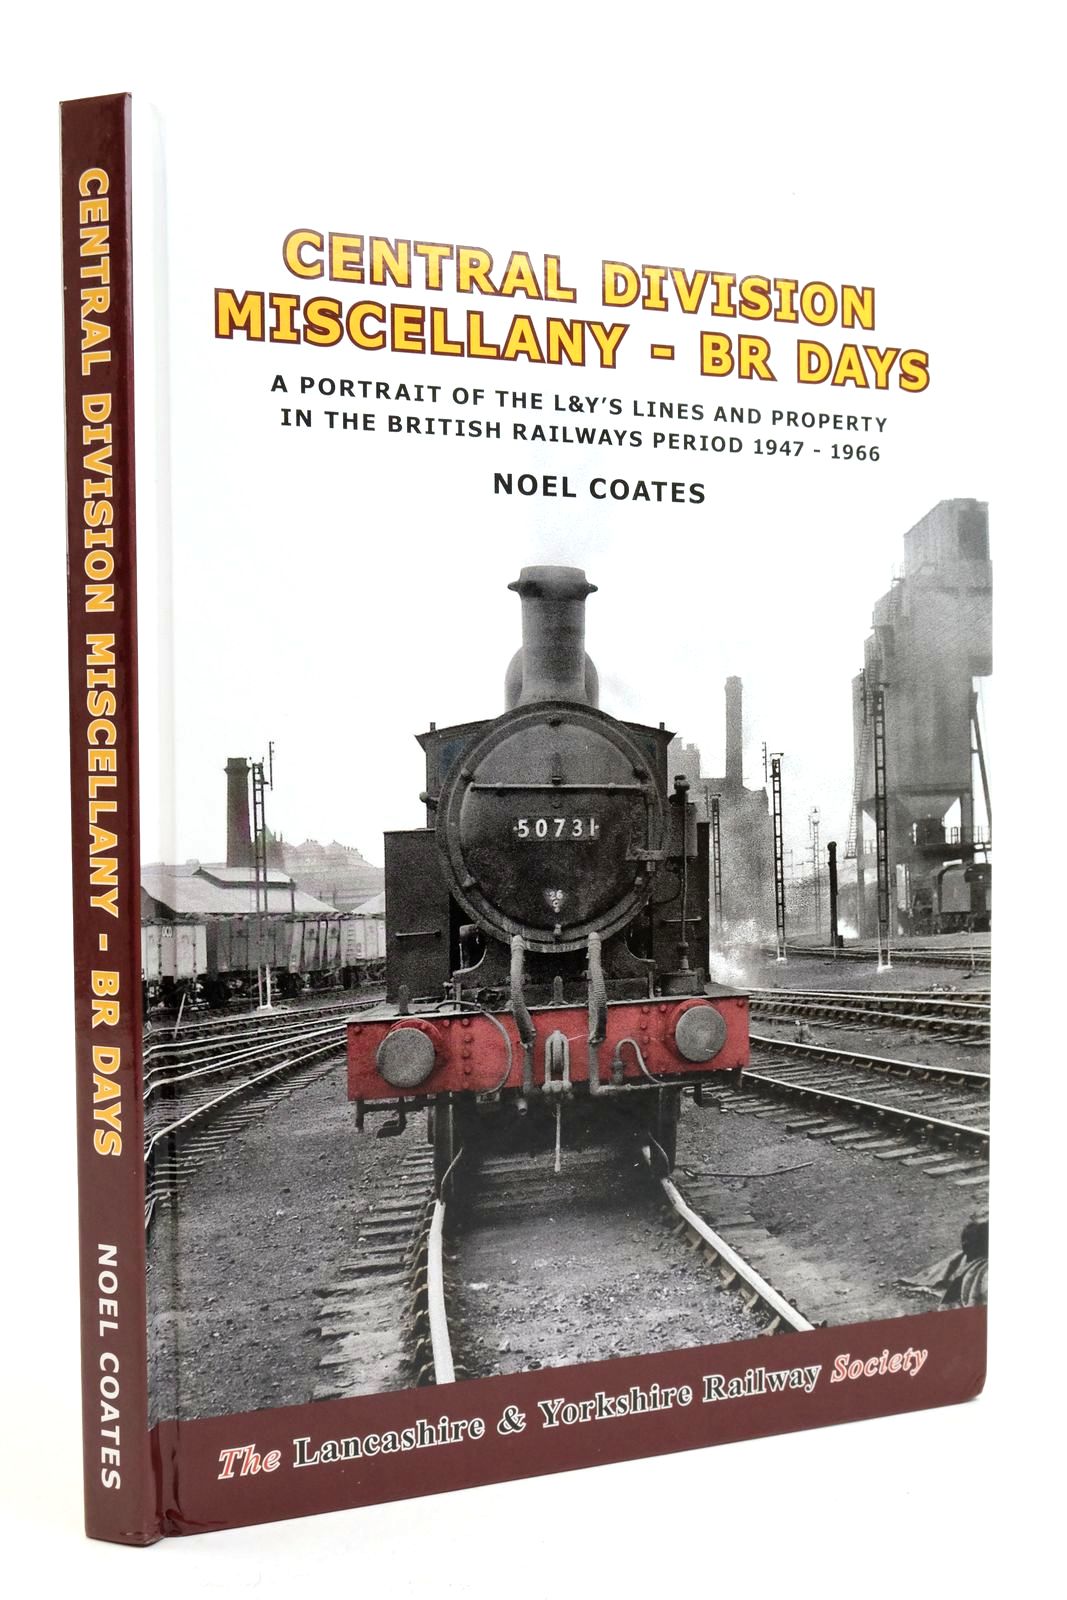 Photo of CENTRAL DIVISION MISCELLANY - BR DAYS written by Coates, Neil published by The Lancashire &amp; Yorkshire Railway Society (STOCK CODE: 2138928)  for sale by Stella & Rose's Books